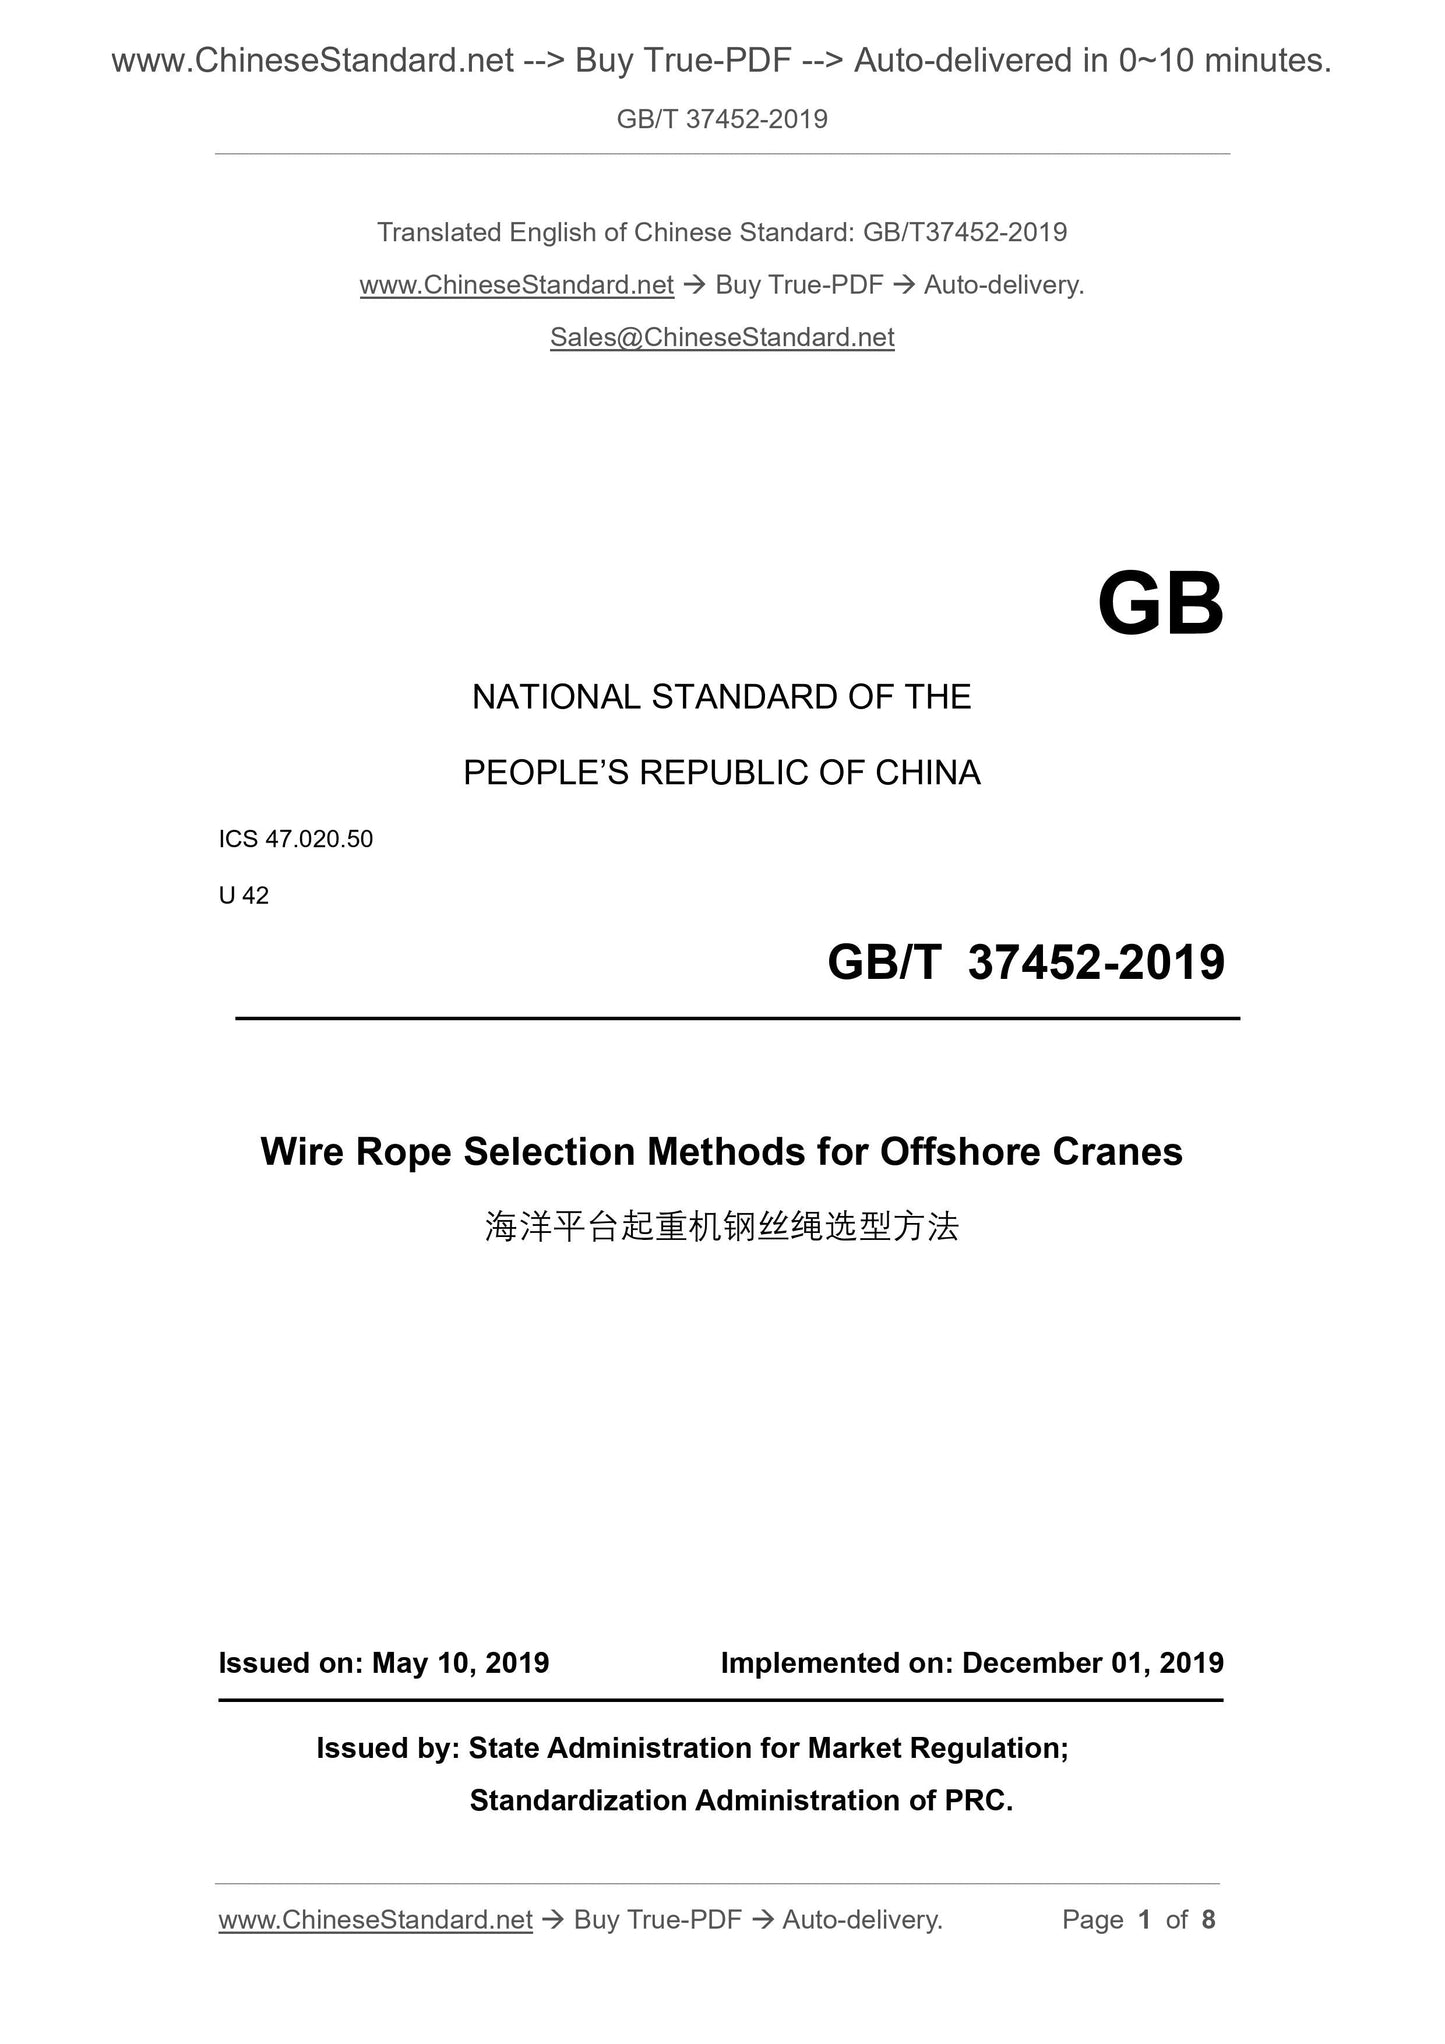 GB/T 37452-2019 Page 1